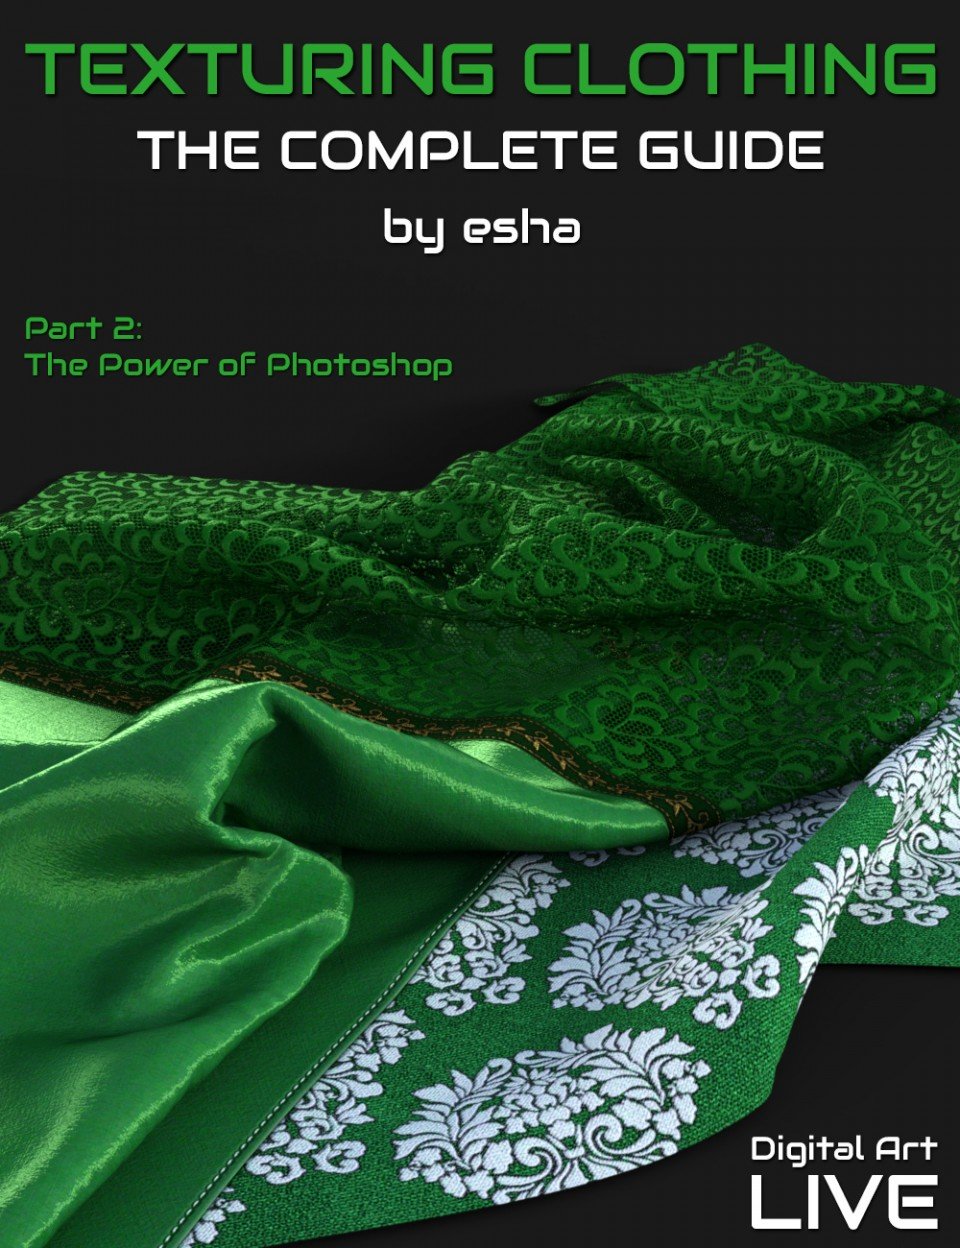 The Complete Guide to Texturing Clothing – Part 2_DAZ3D下载站